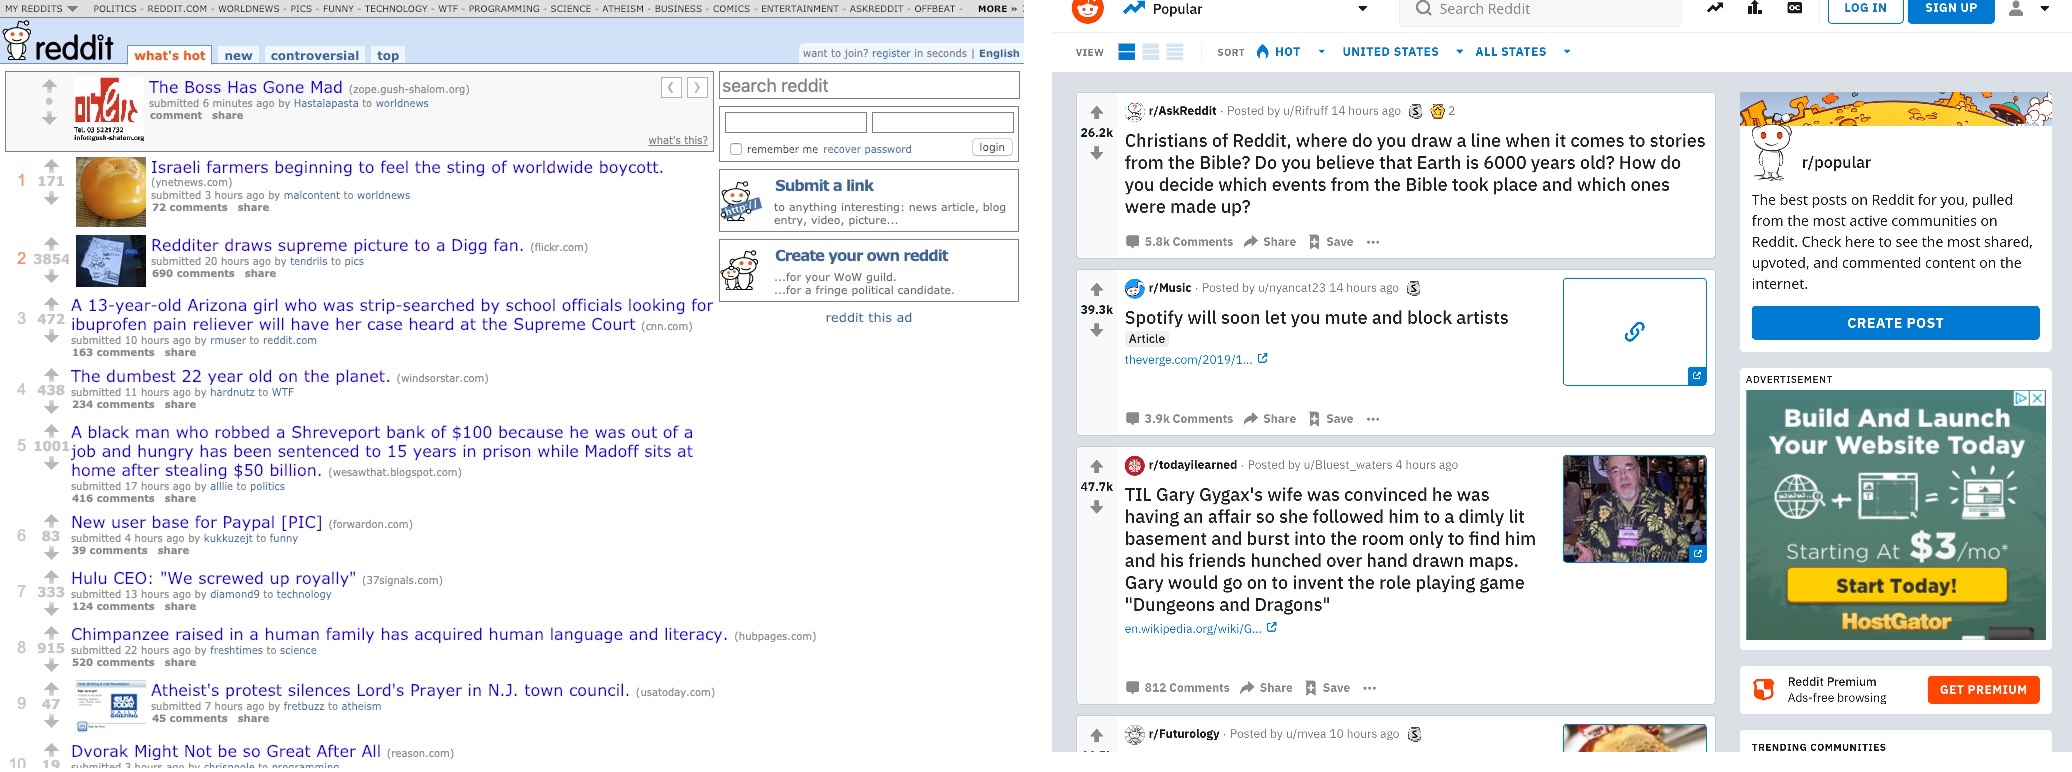 reddit - Greddit to the weboval Christinaf Red when you drawwabine when it comes to para decide which was from the Bible took place and which one Build And Launch Your Website Today Starting Al S3 Start Todet Hetor ed un tas d e s's produce Lond o n D e M